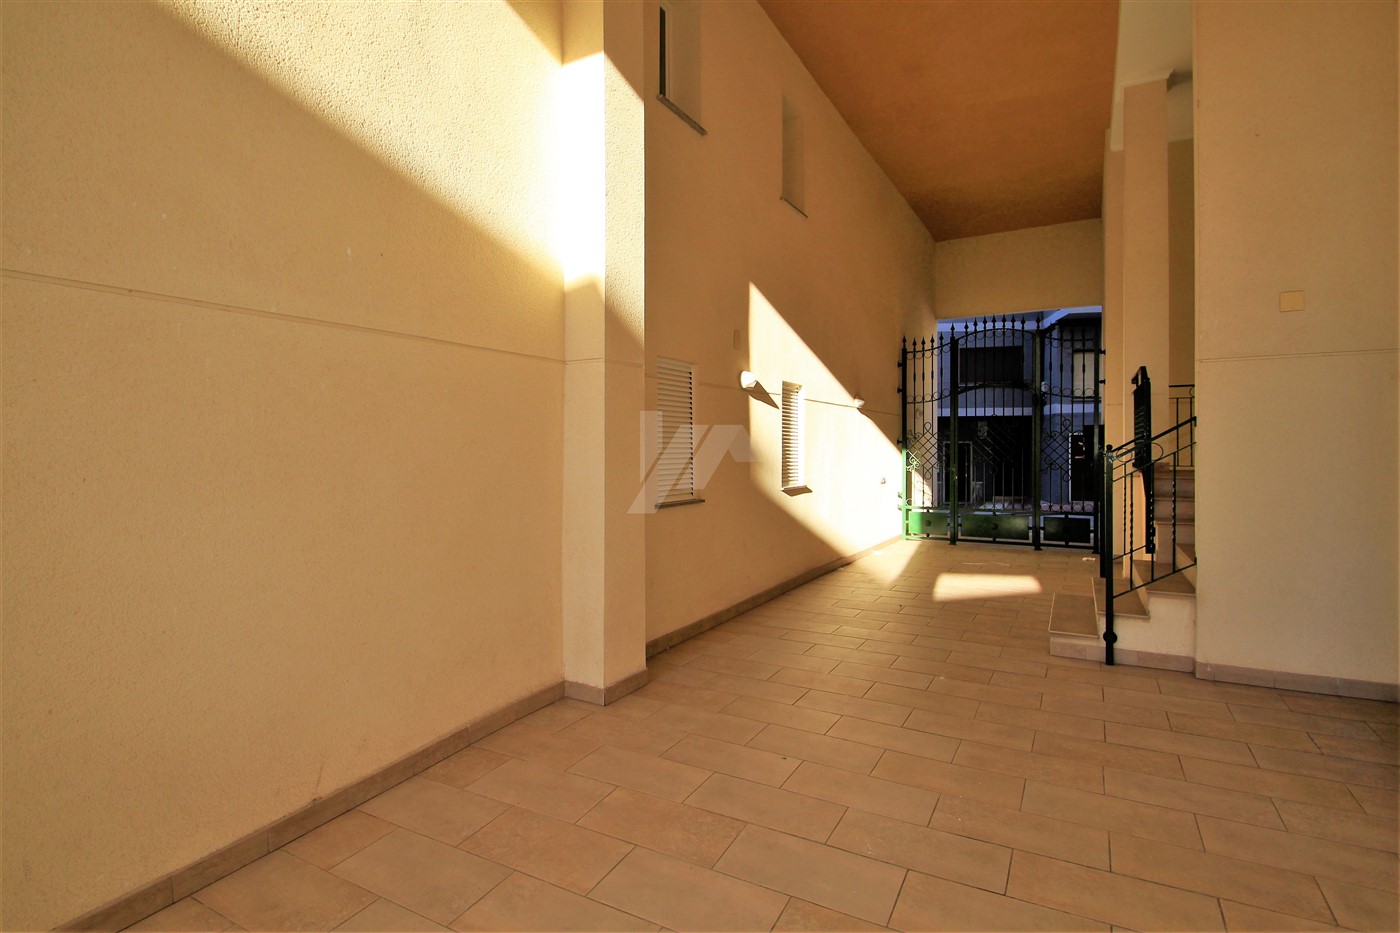 Flat for sale in the centre of Teulada, Costa Blanca